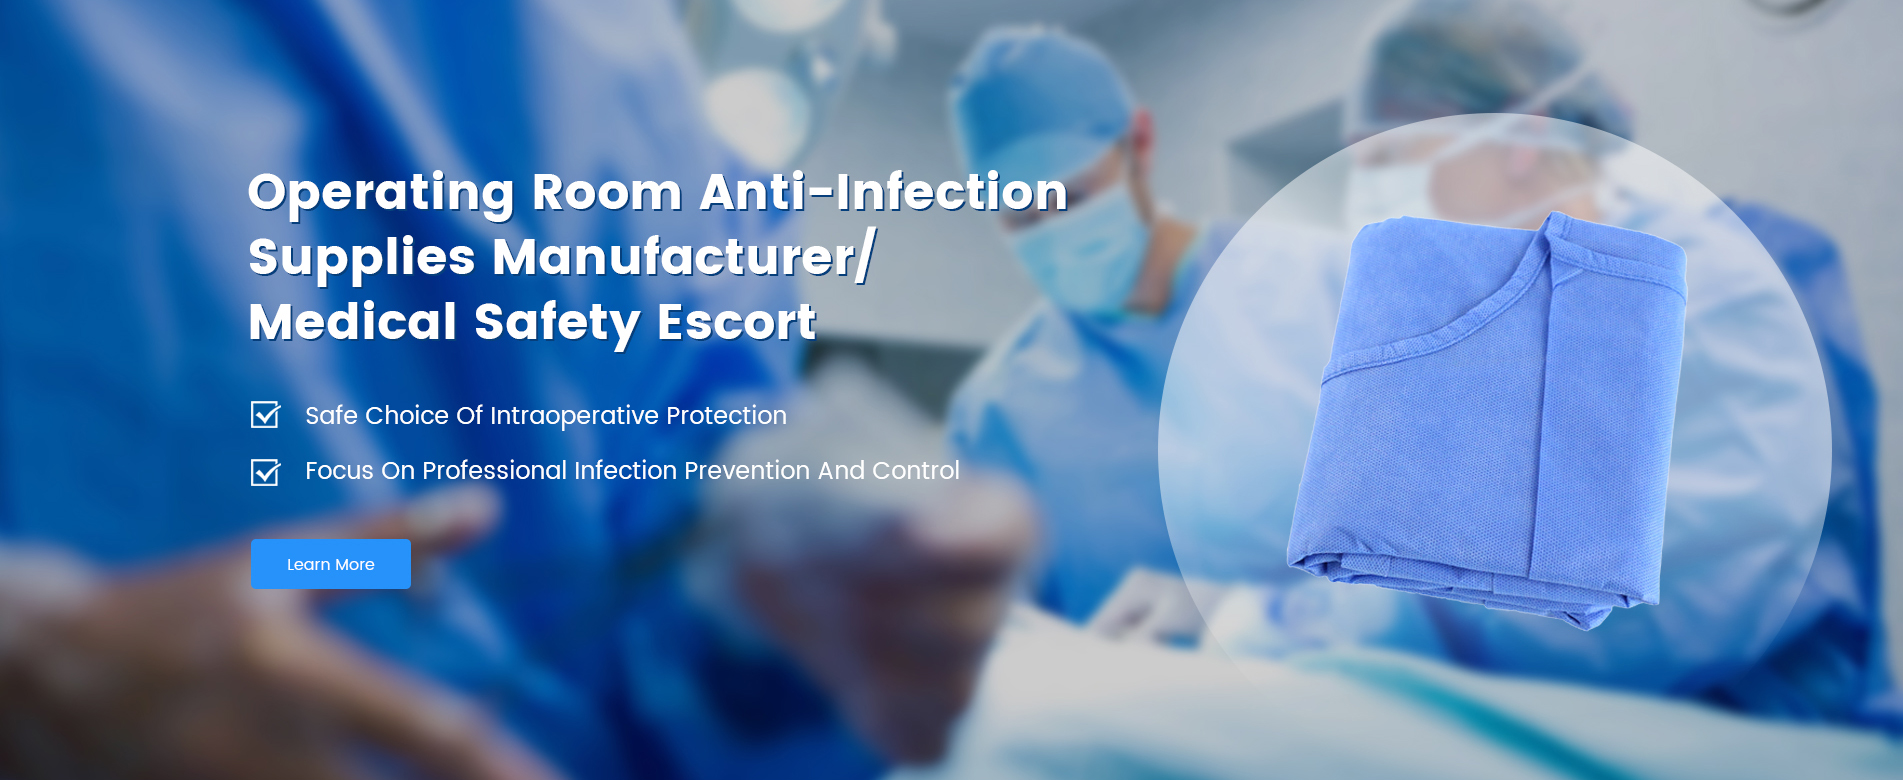 Professional infection prevention and control manufacturers